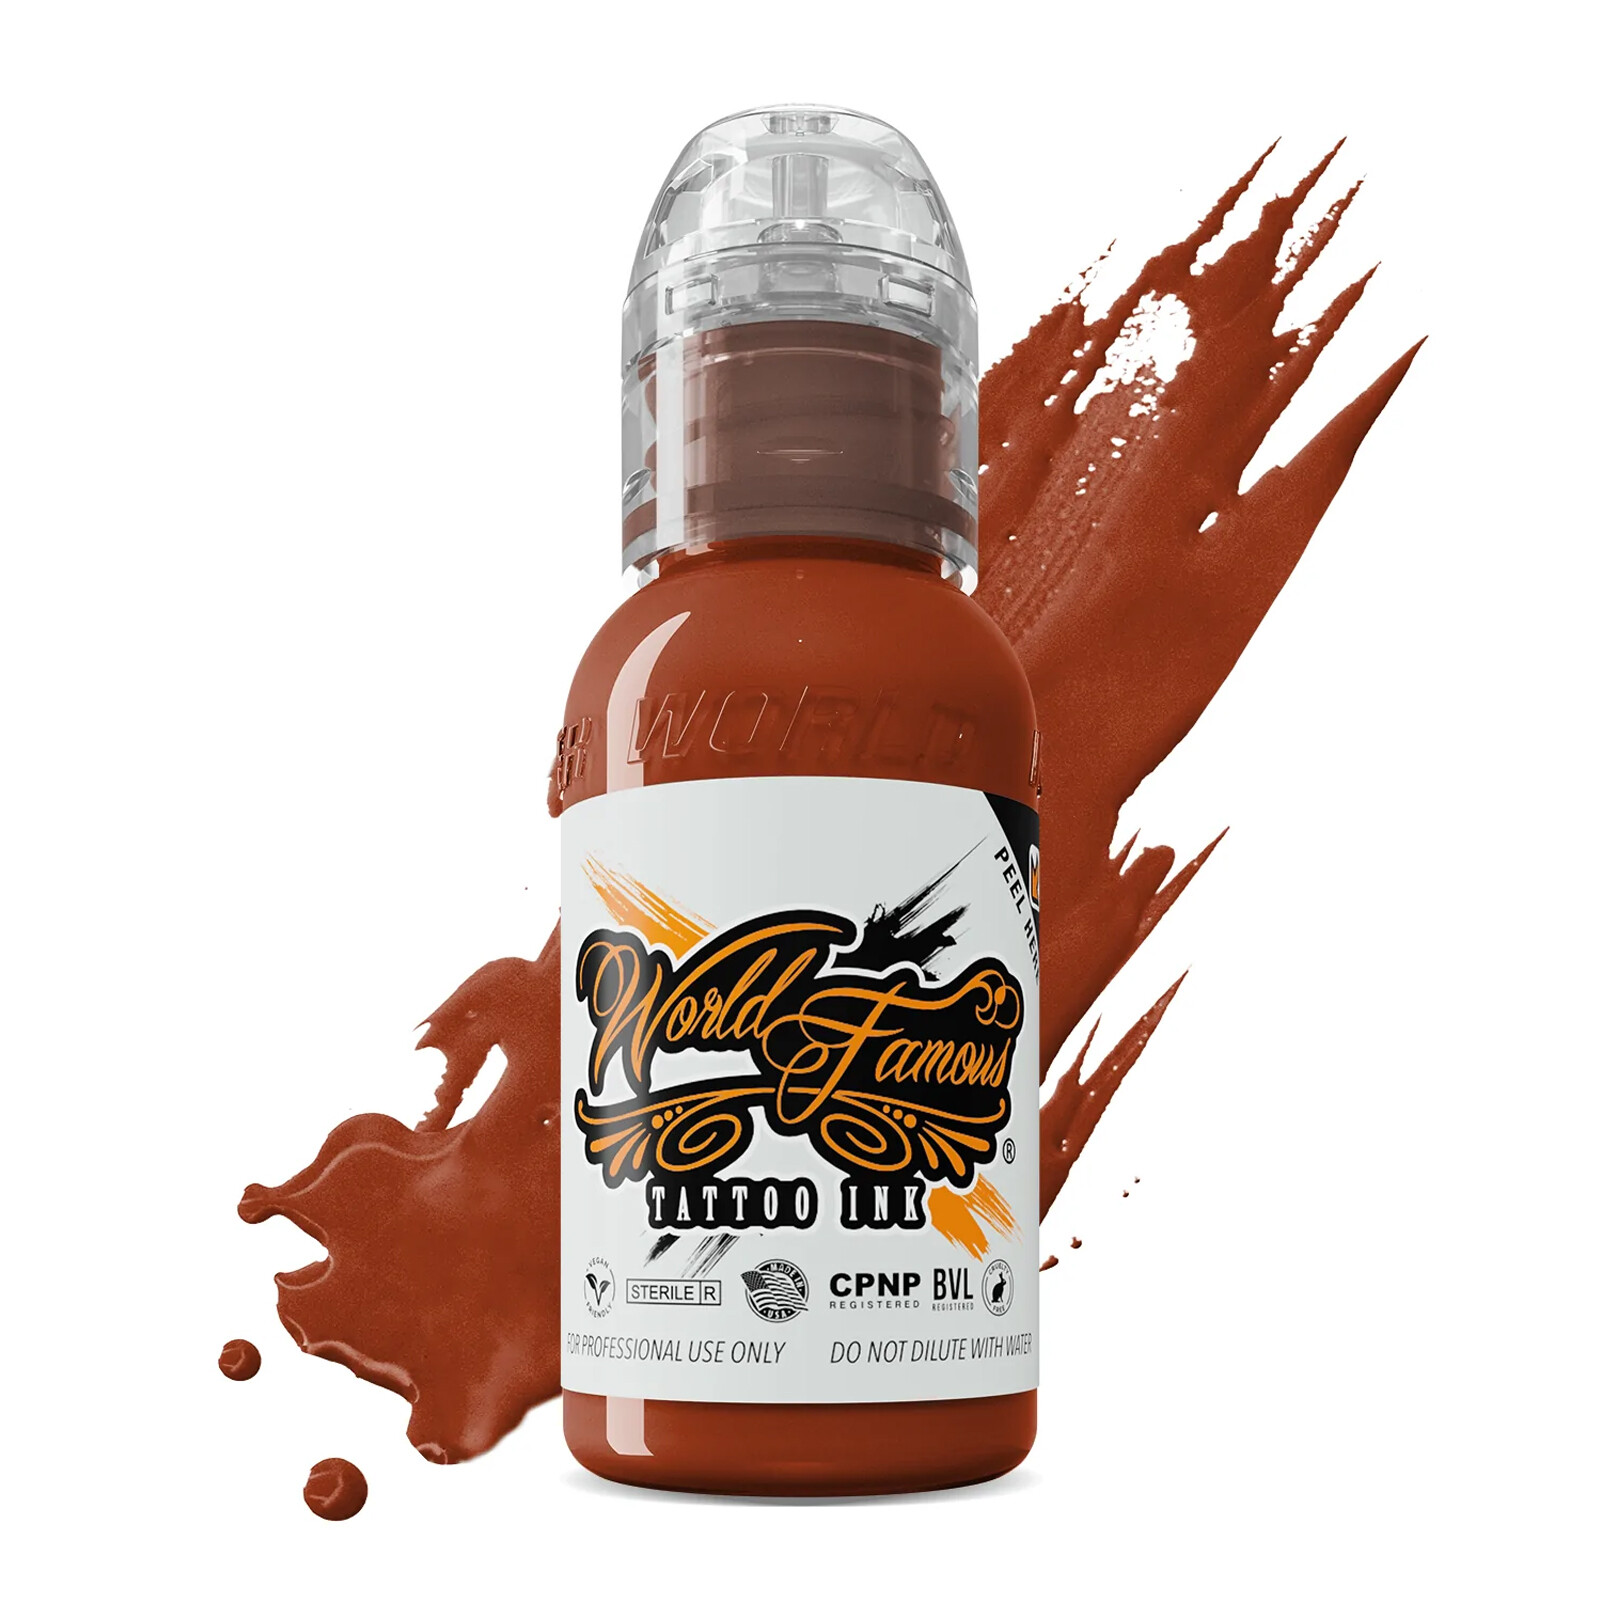 Краска World Famous Tattoo Ink Red Clay 1 Унция 30 мл краска world famous tattoo ink red clay 2 унции 60 мл